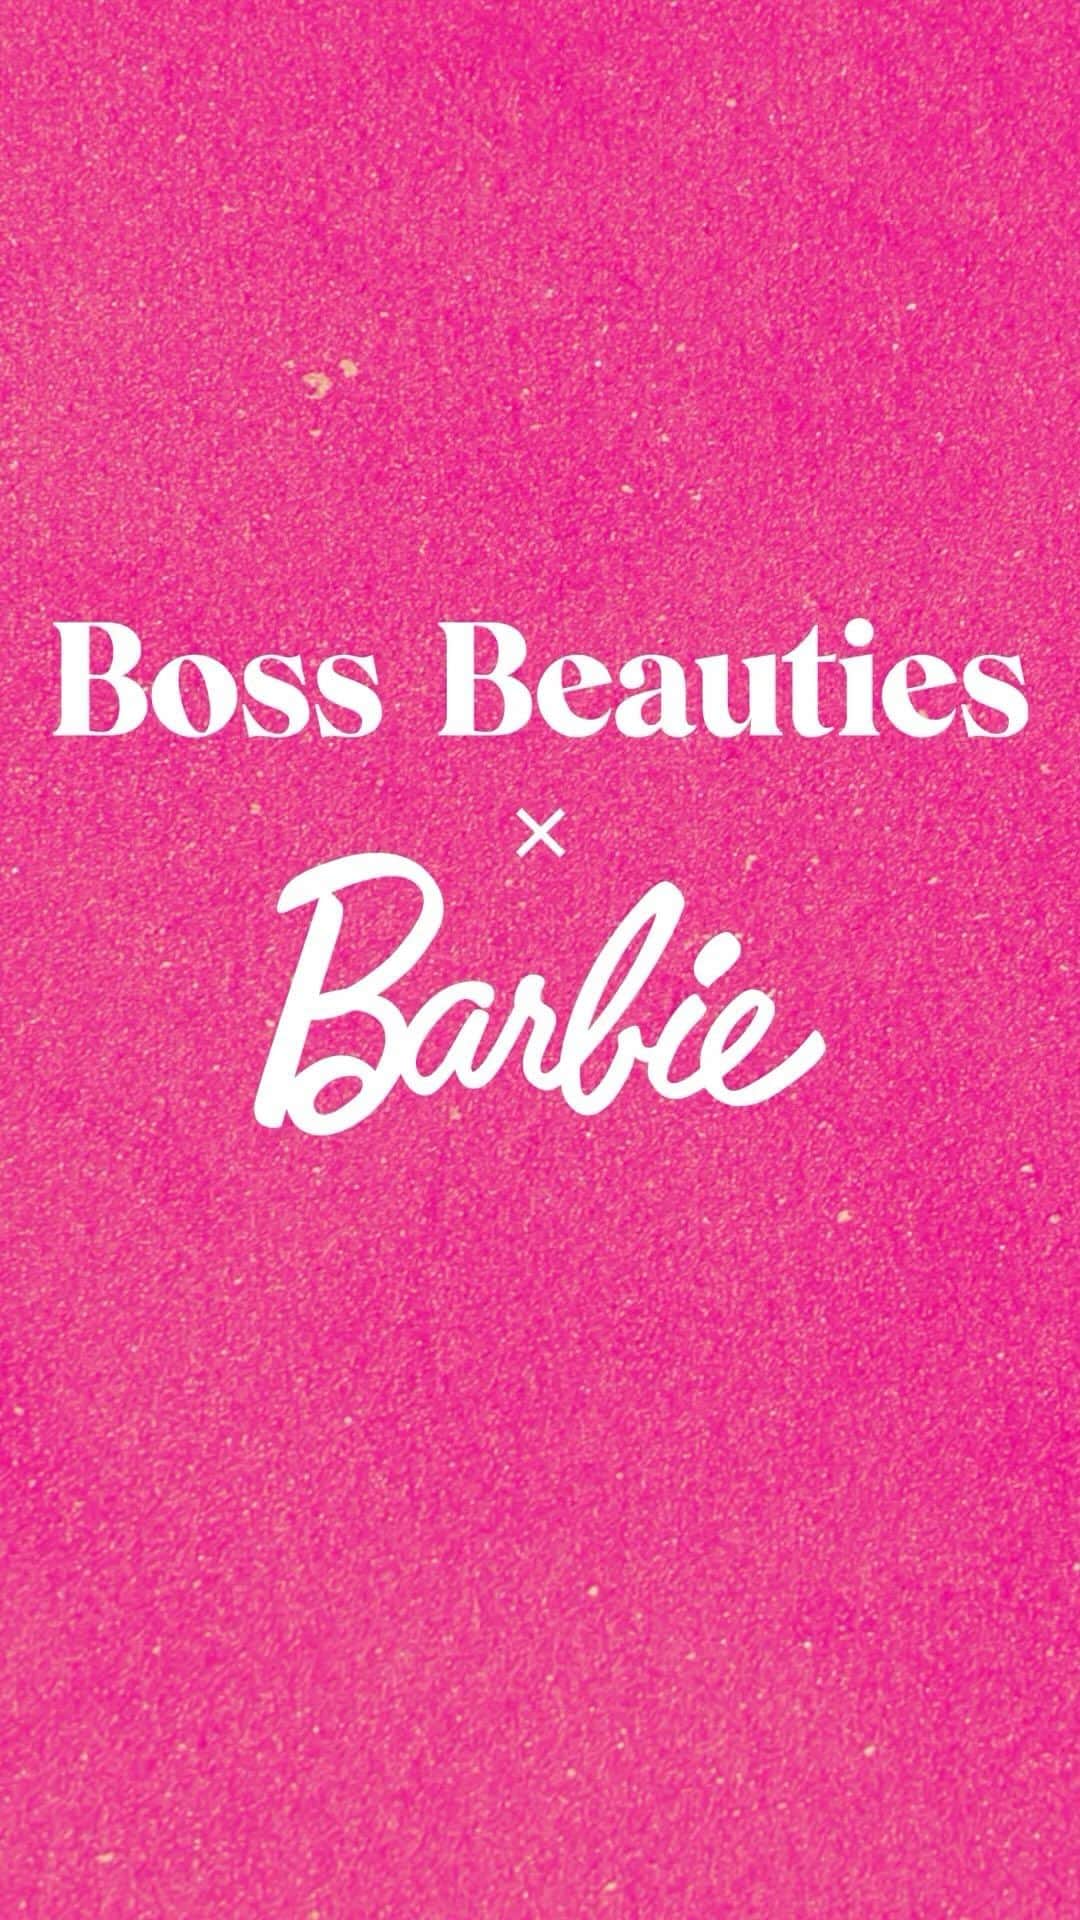 Mattelのインスタグラム：「Welcome to Web3, @Barbie! 💖  We’re so excited to announce the #BossBeautiesxBarbie You Can Be Anything collection in celebration of over 250 Barbie careers! From artists to astronauts, CEOs to pet vets, Barbie continues to break down barriers across industries and show us anyone can be anything.  At Boss Beauties, we are on a mission to bring one million women & girls into a web3 world - so they can learn about new technologies and be better prepared for the future. We couldn’t be more excited to do this with Barbie, whom we all love.  Claim yours during Early Access only to receive a BONUS surprise digital collectible, only on @mattelcreations.   Barbie can be anything, and so can you, BB ✨」